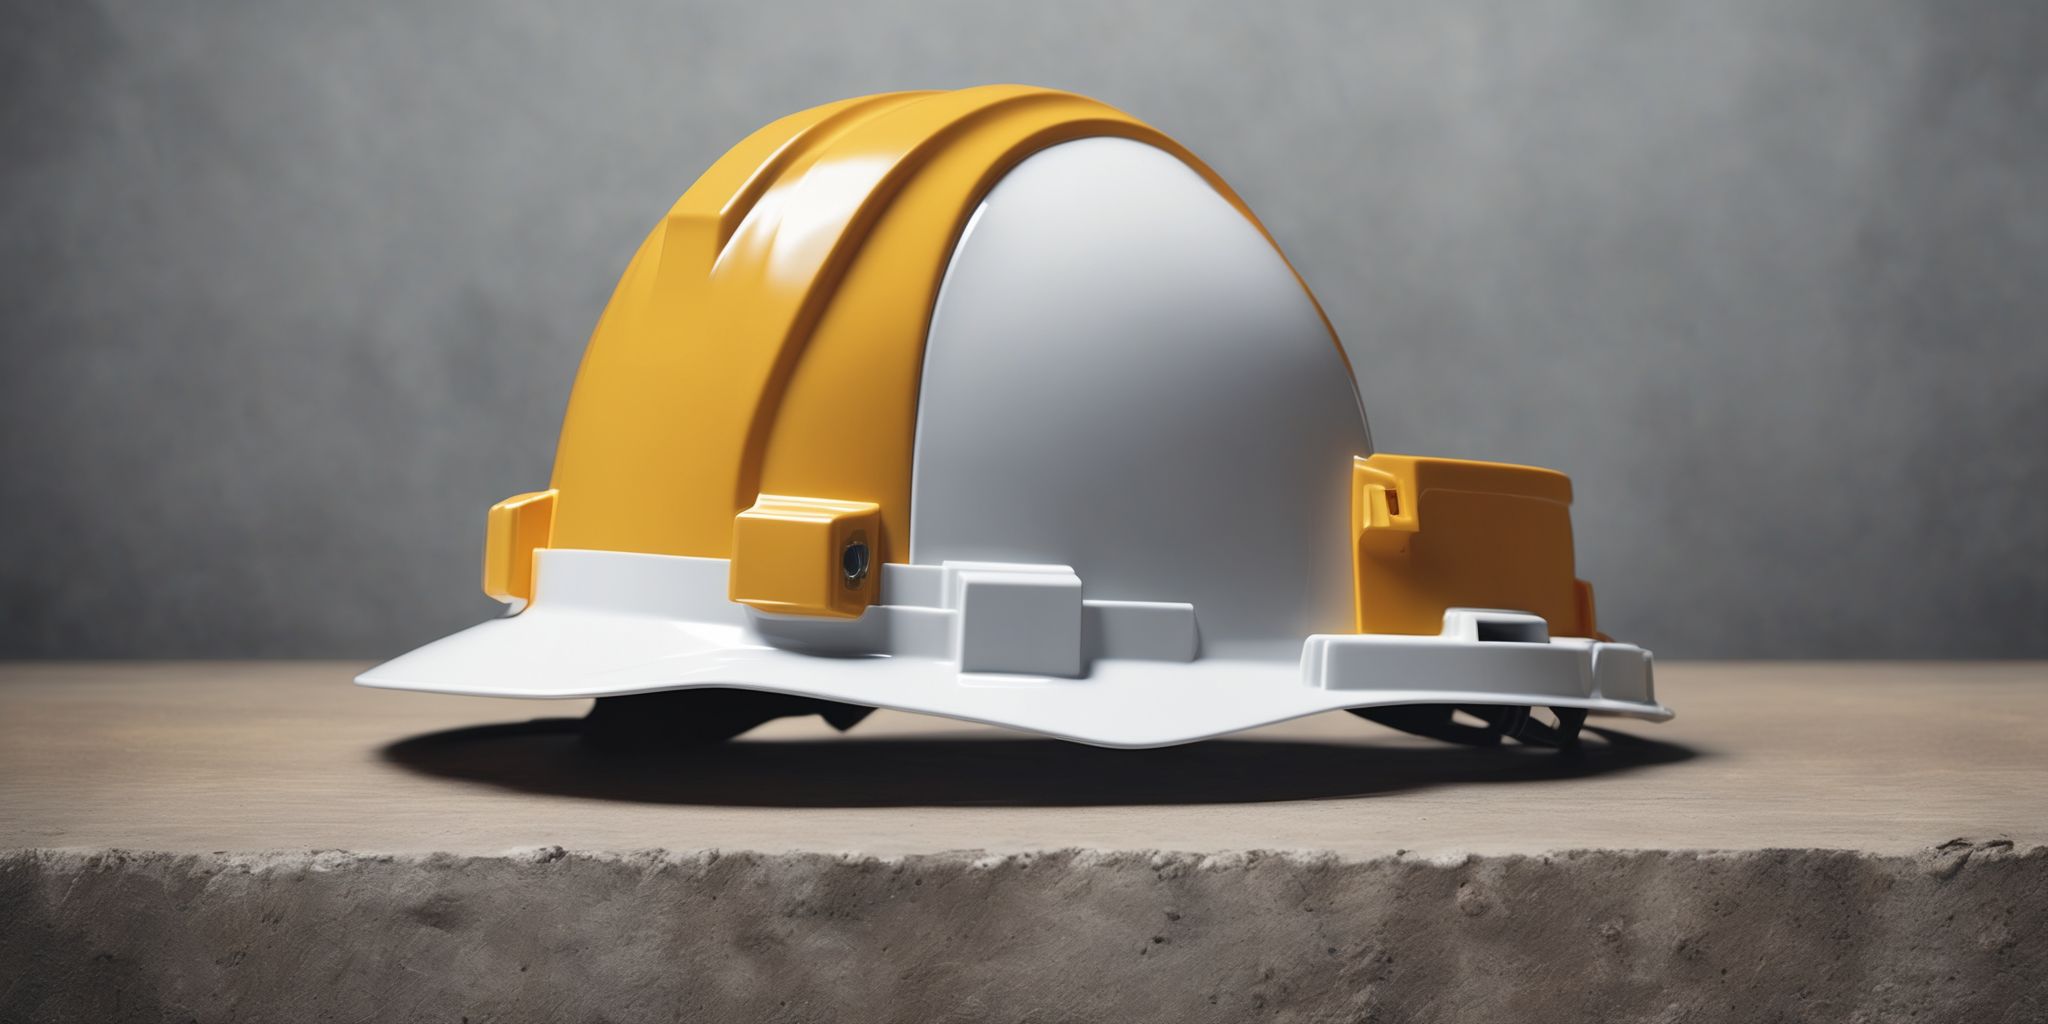 Hardhat  in realistic, photographic style